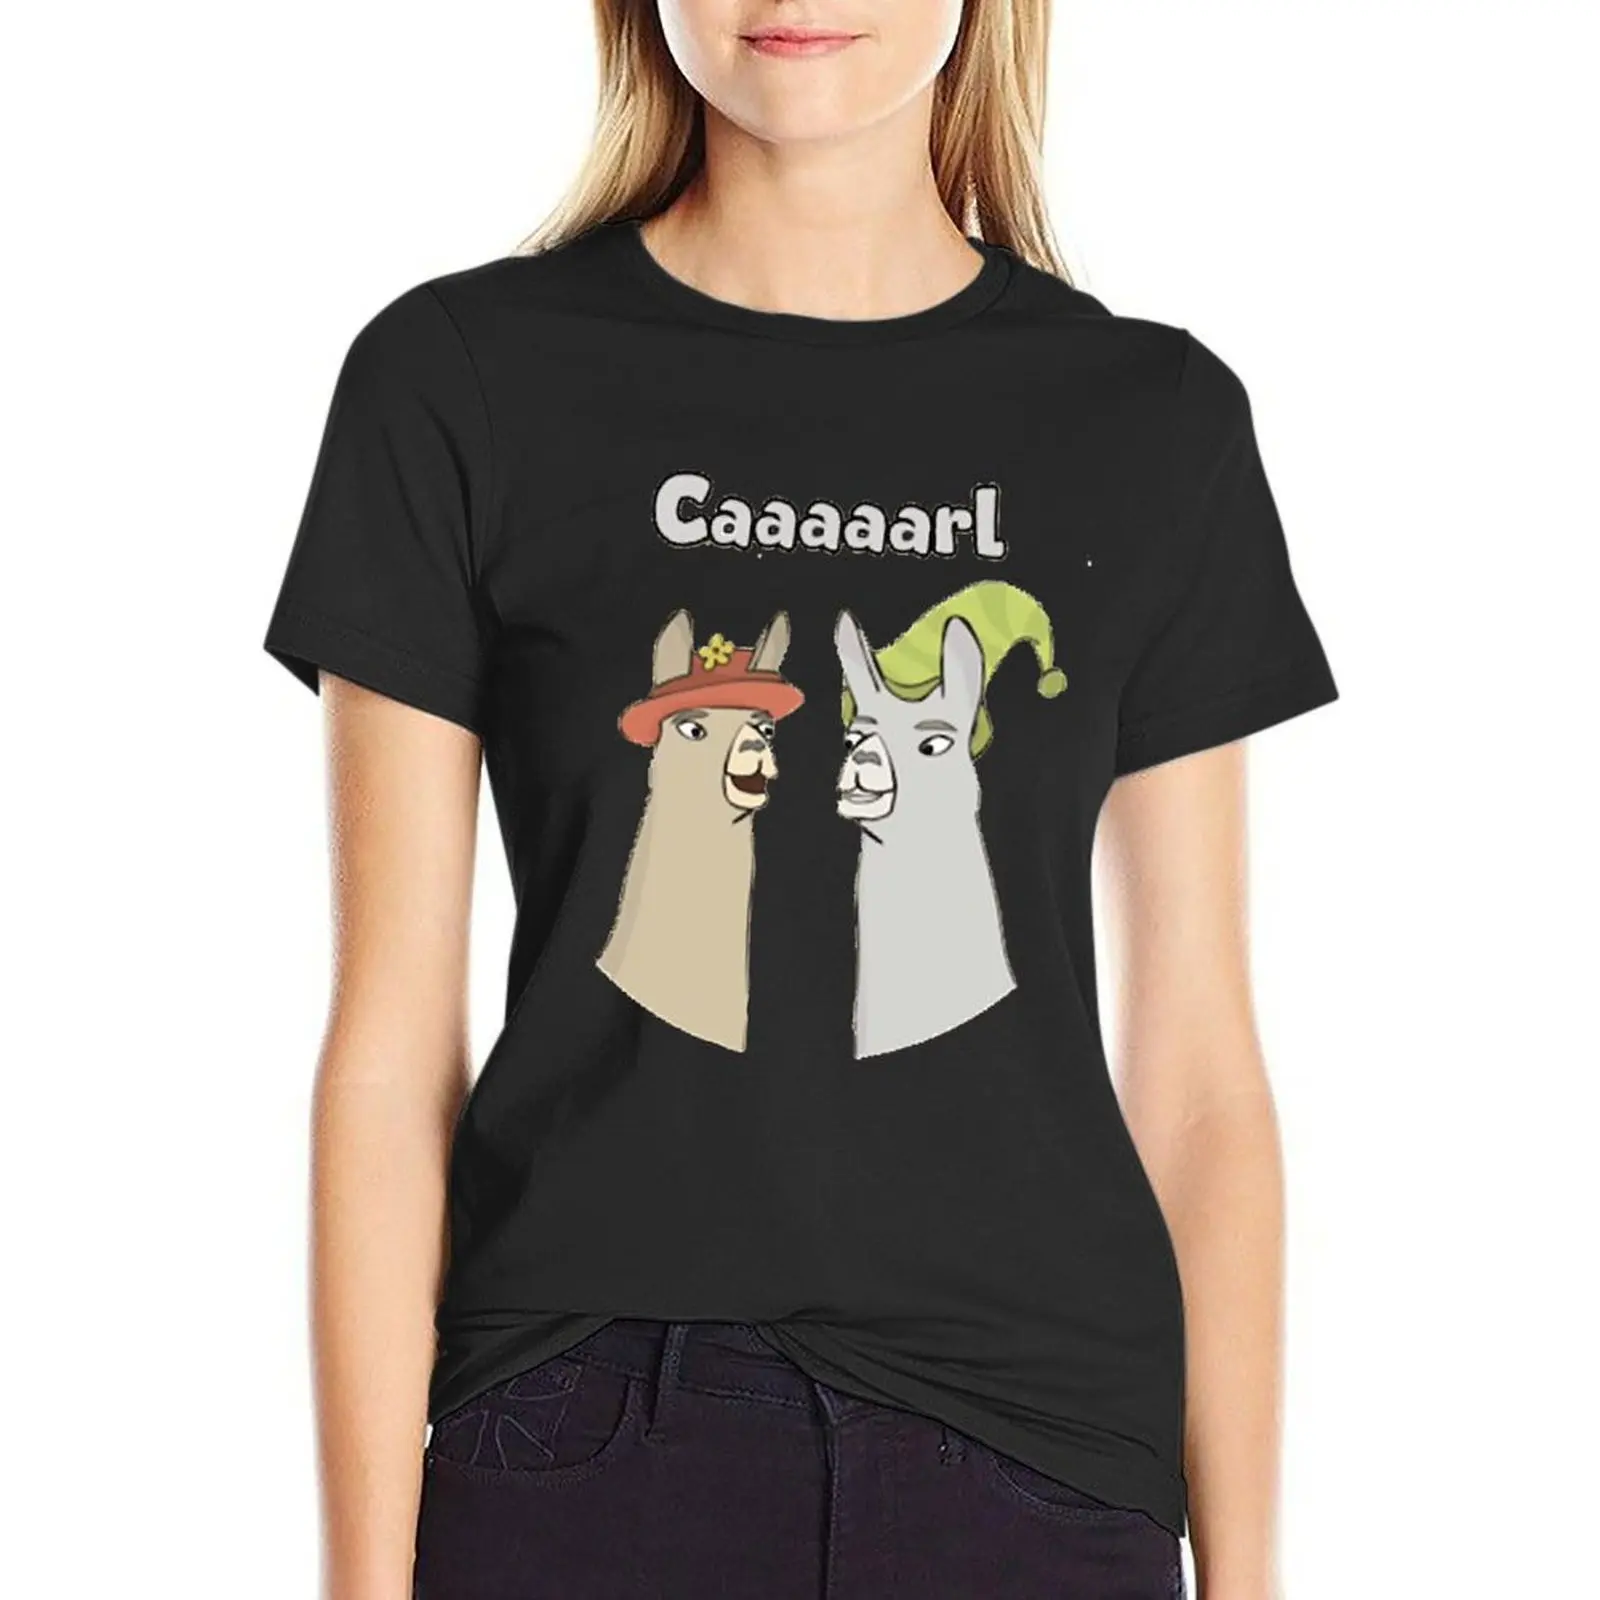 

Llamas with hats caaaarl T-shirt female hippie clothes cute tops cropped t shirts for Women